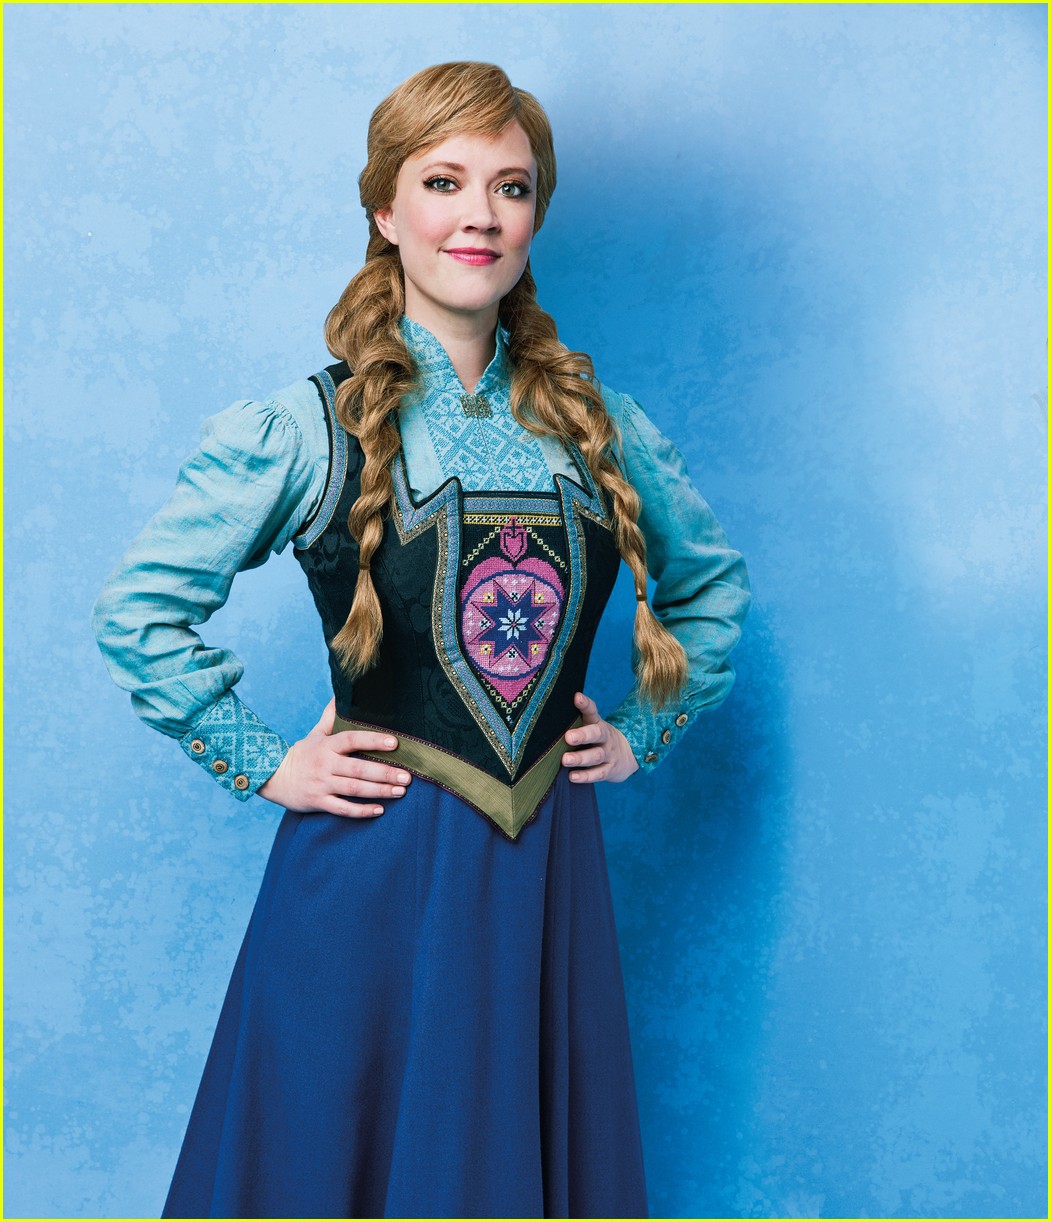 broadways-frozen-cast-pose-for-portraits-in-costume-05